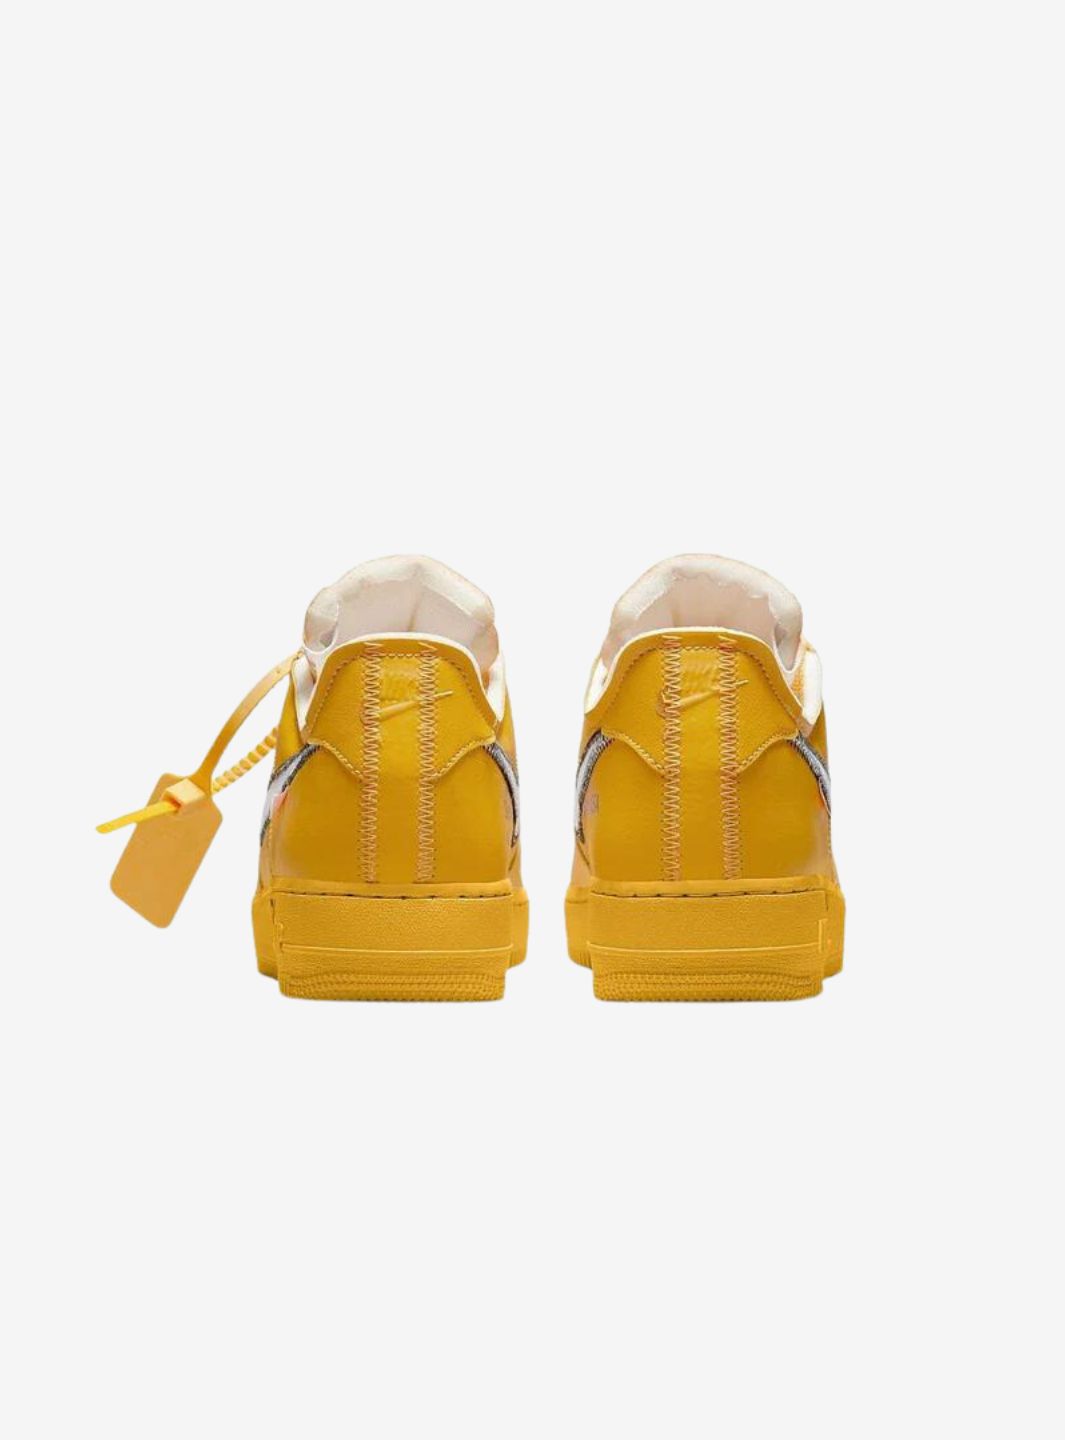 Nike Air Force 1 Low Off-White ICA University Gold - DD1876-700 | ResellZone